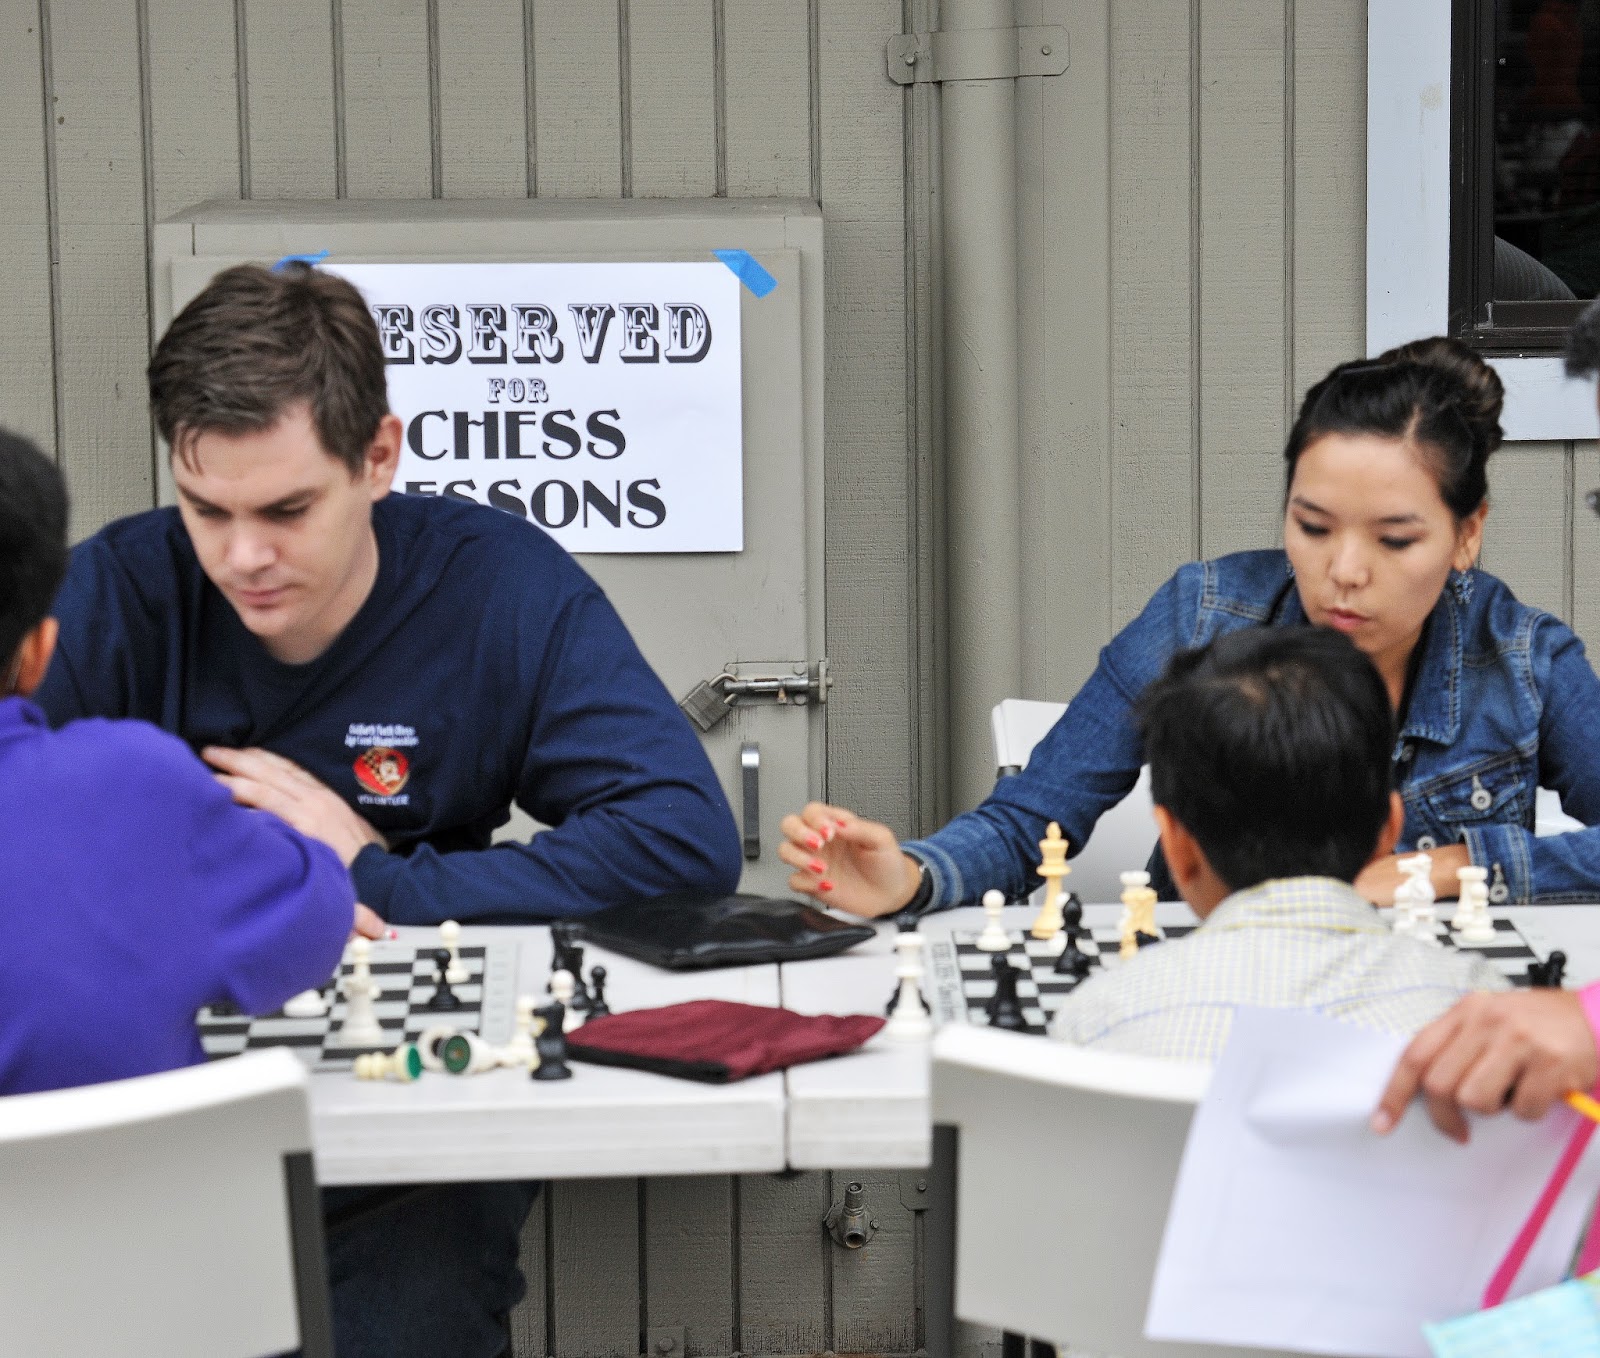 Emory Tate: The Inspirational Life of a Chess Master